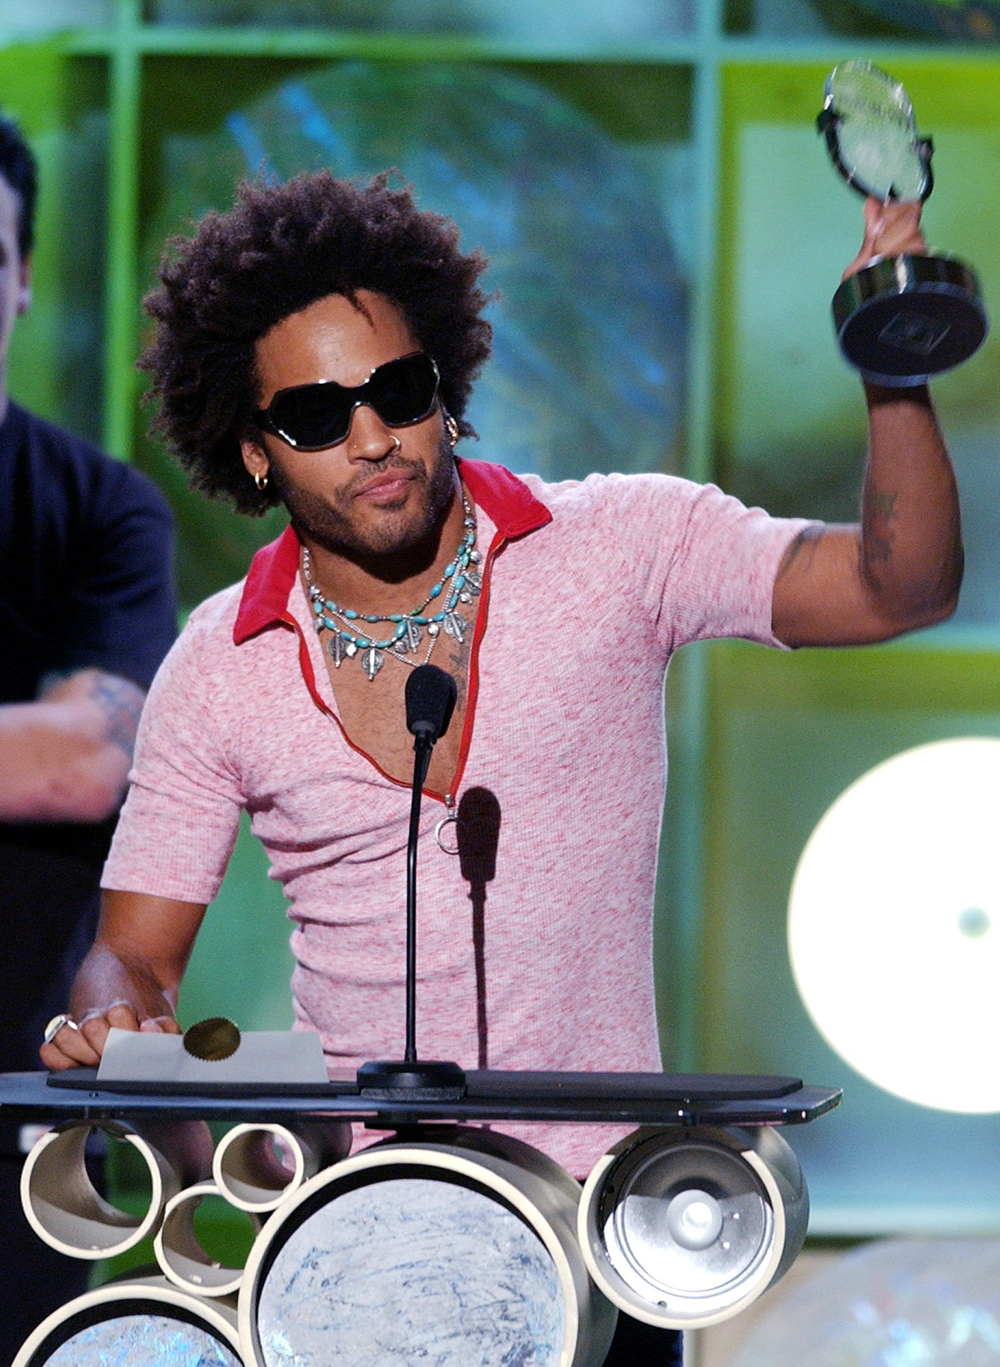 <p>Lenny Kravitz accepts the award for Artist of the Year: Pop Alternative Radio, at the Radio Music Awards in Las Vegas. He wore red polo and turquoise jewelry.</p>